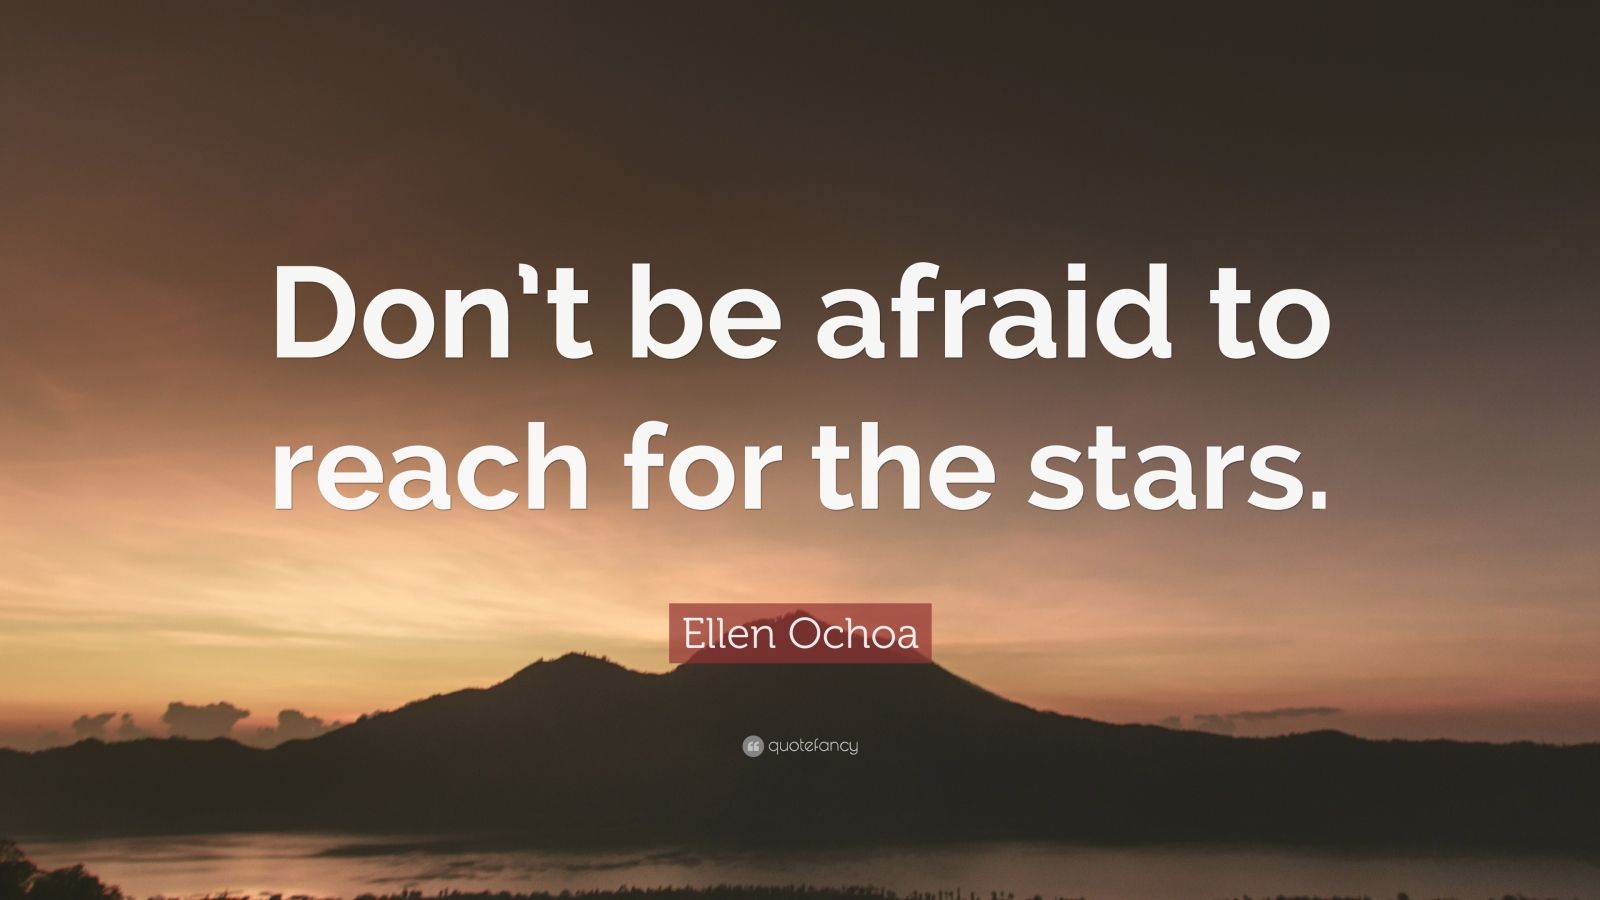 Ellen Ochoa Quote: "Don't be afraid to reach for the stars." (12 wallpapers) - Quotefancy